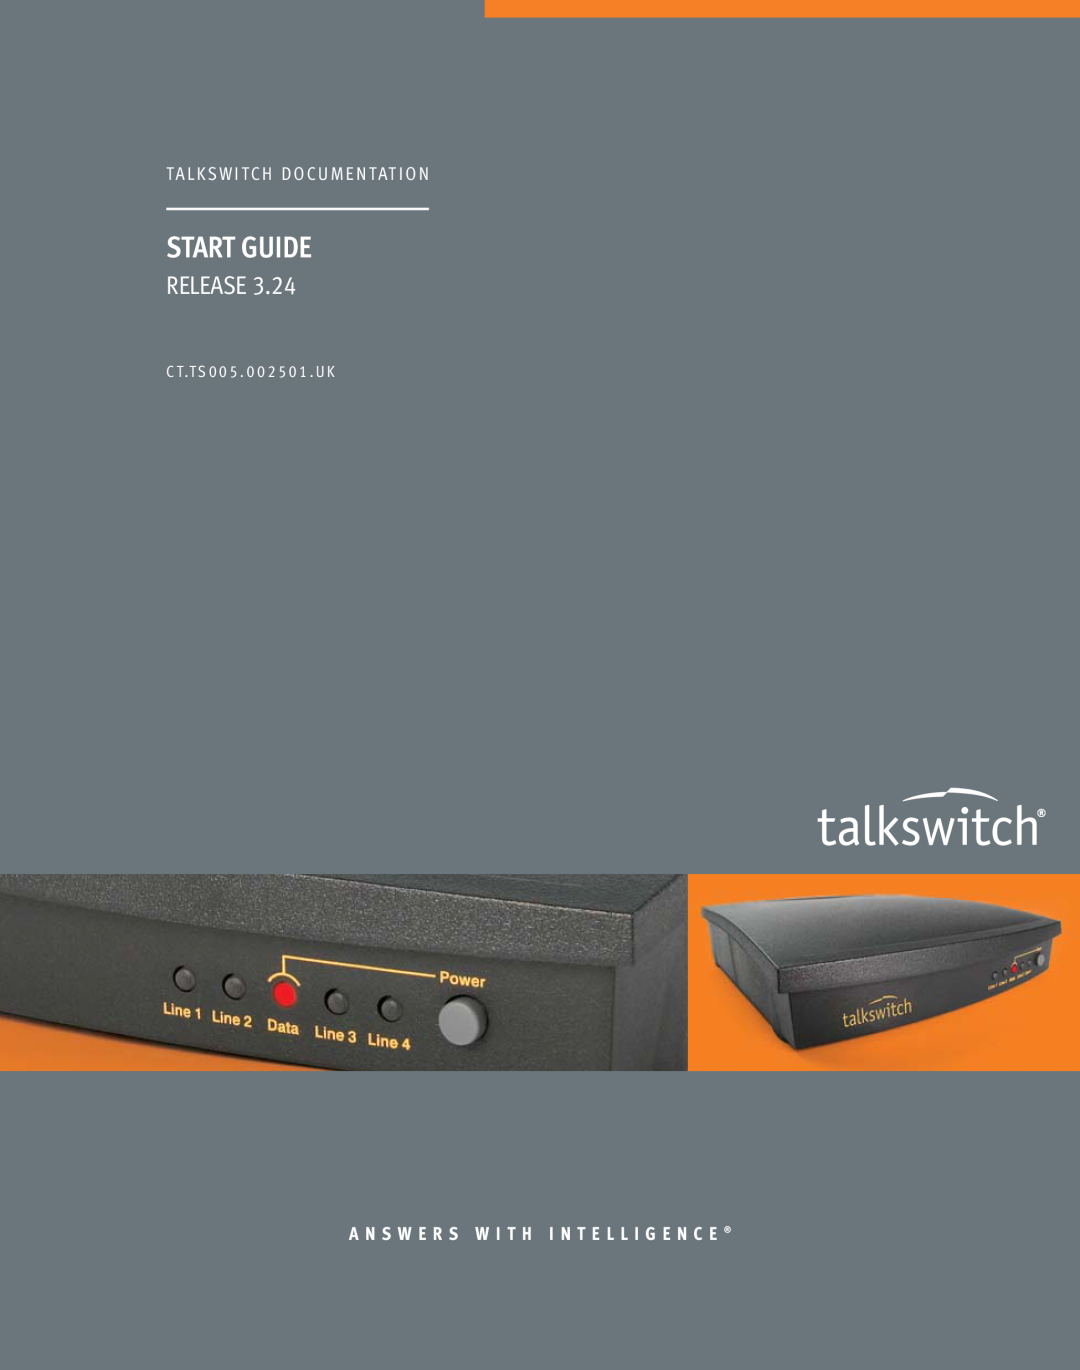 Talkswitch CT.TS005.002501.UK manual Start Guide, Release, T A L K S W I T C H D O C U M E N T At I O N 